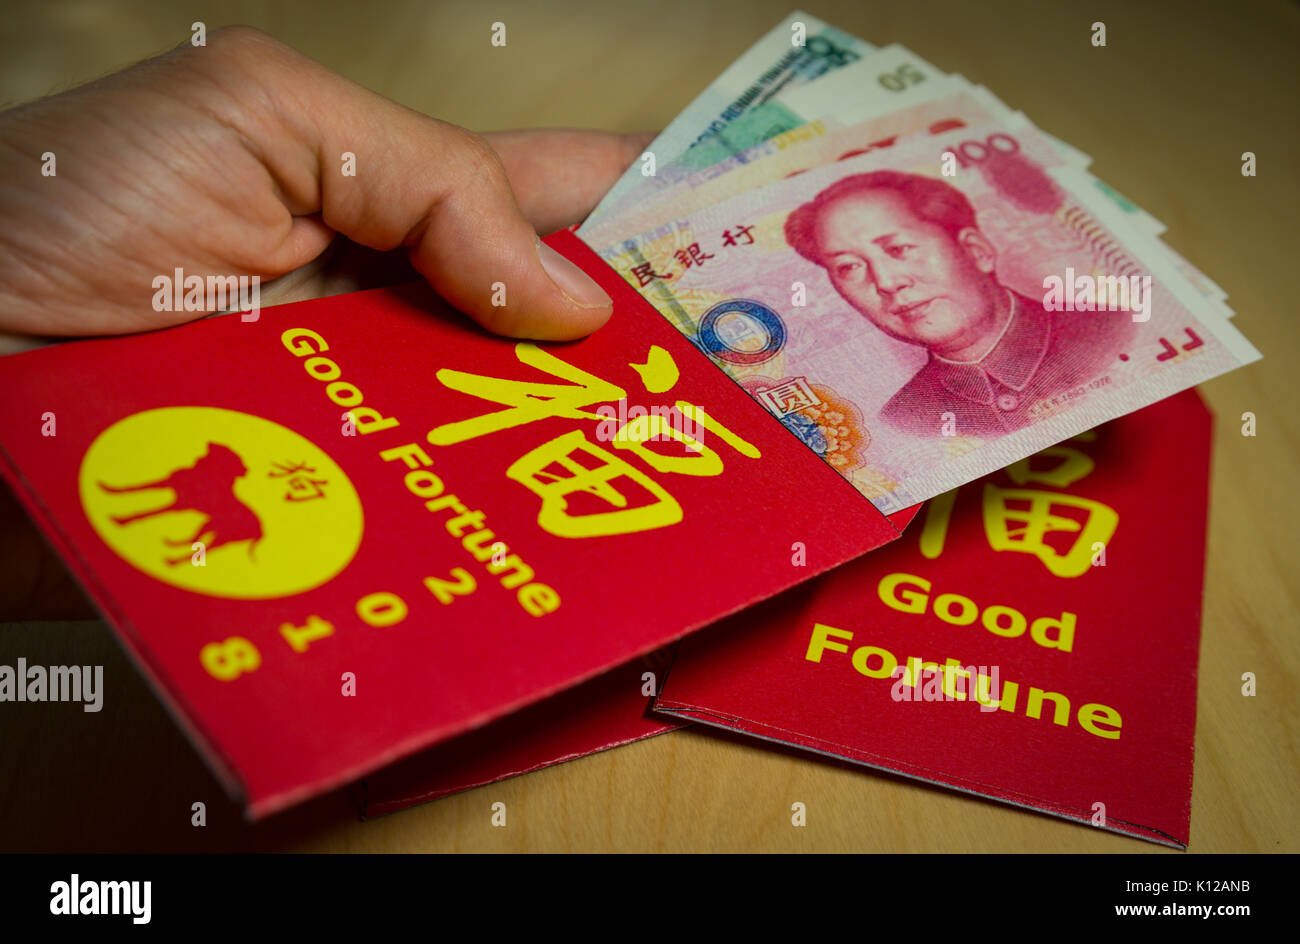 The red envelope or hong bao used for giving money during the